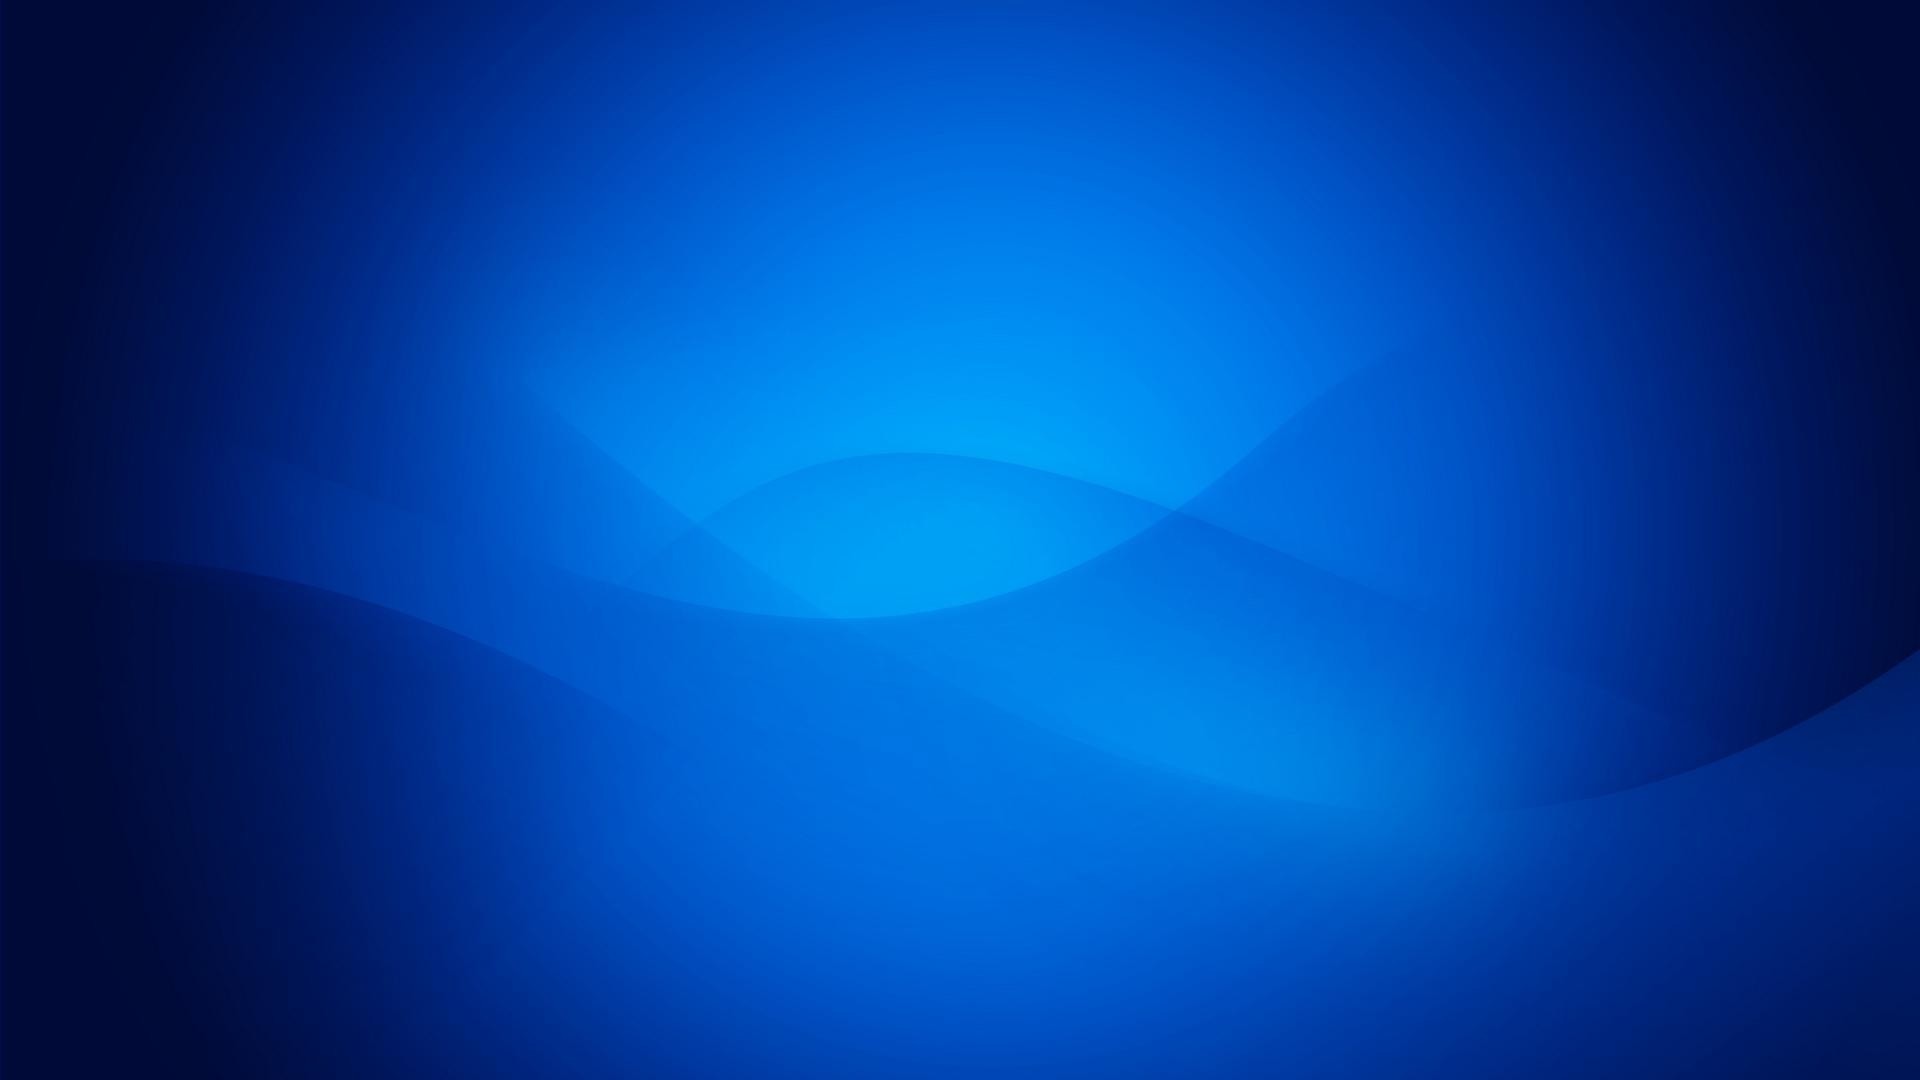 1920x1080 Awesome Blue Backgrounds - Wallpaper Cave